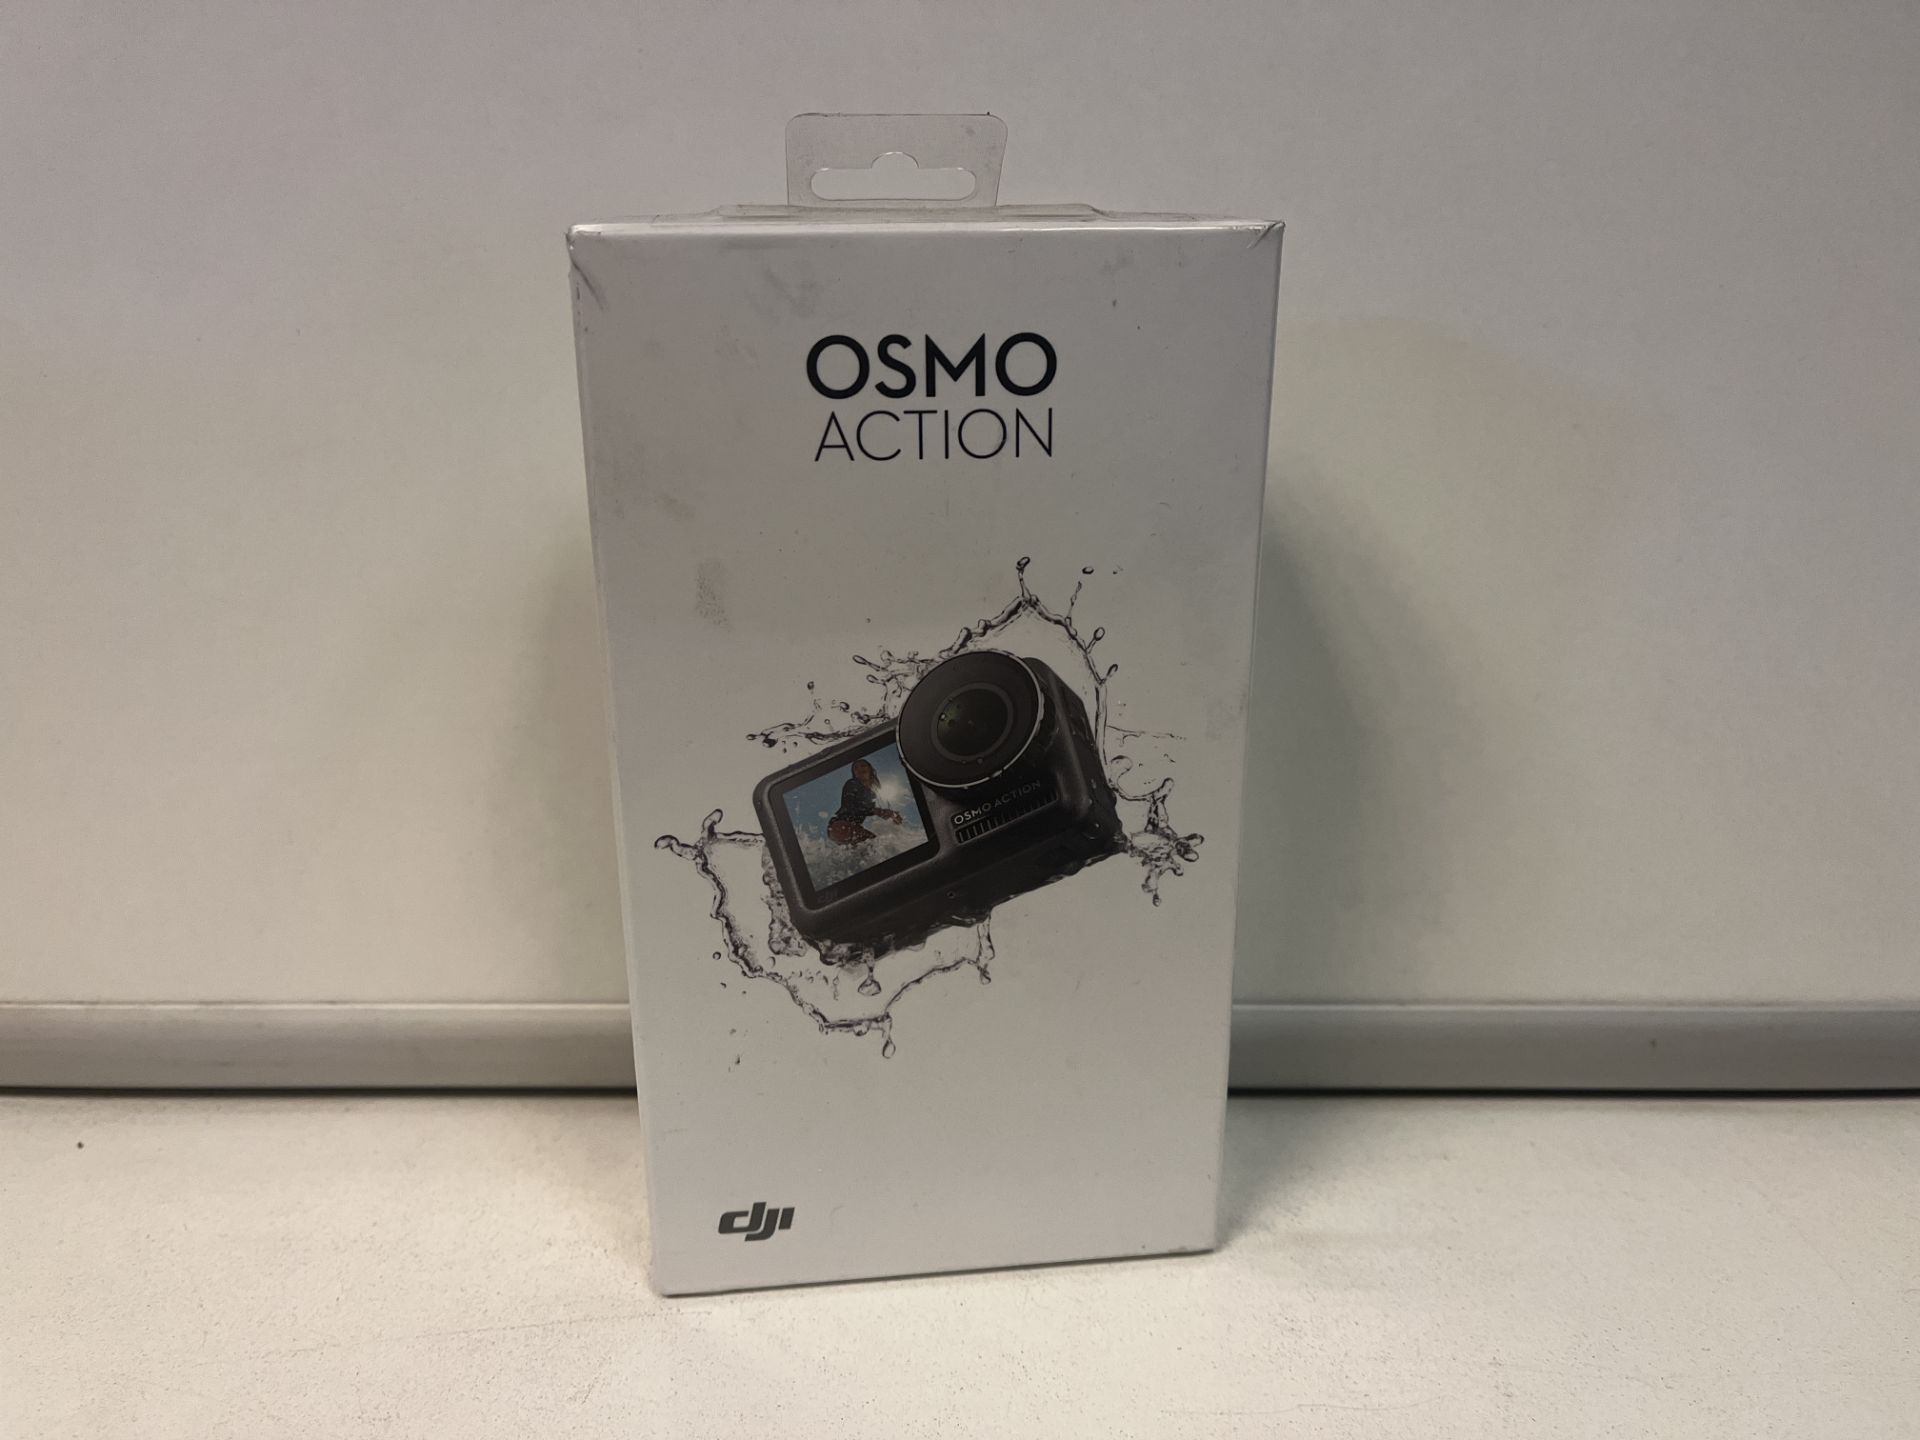 BRAND NEW OSMO ACTION DSI ACTION CAMERA RRP £399 OFF